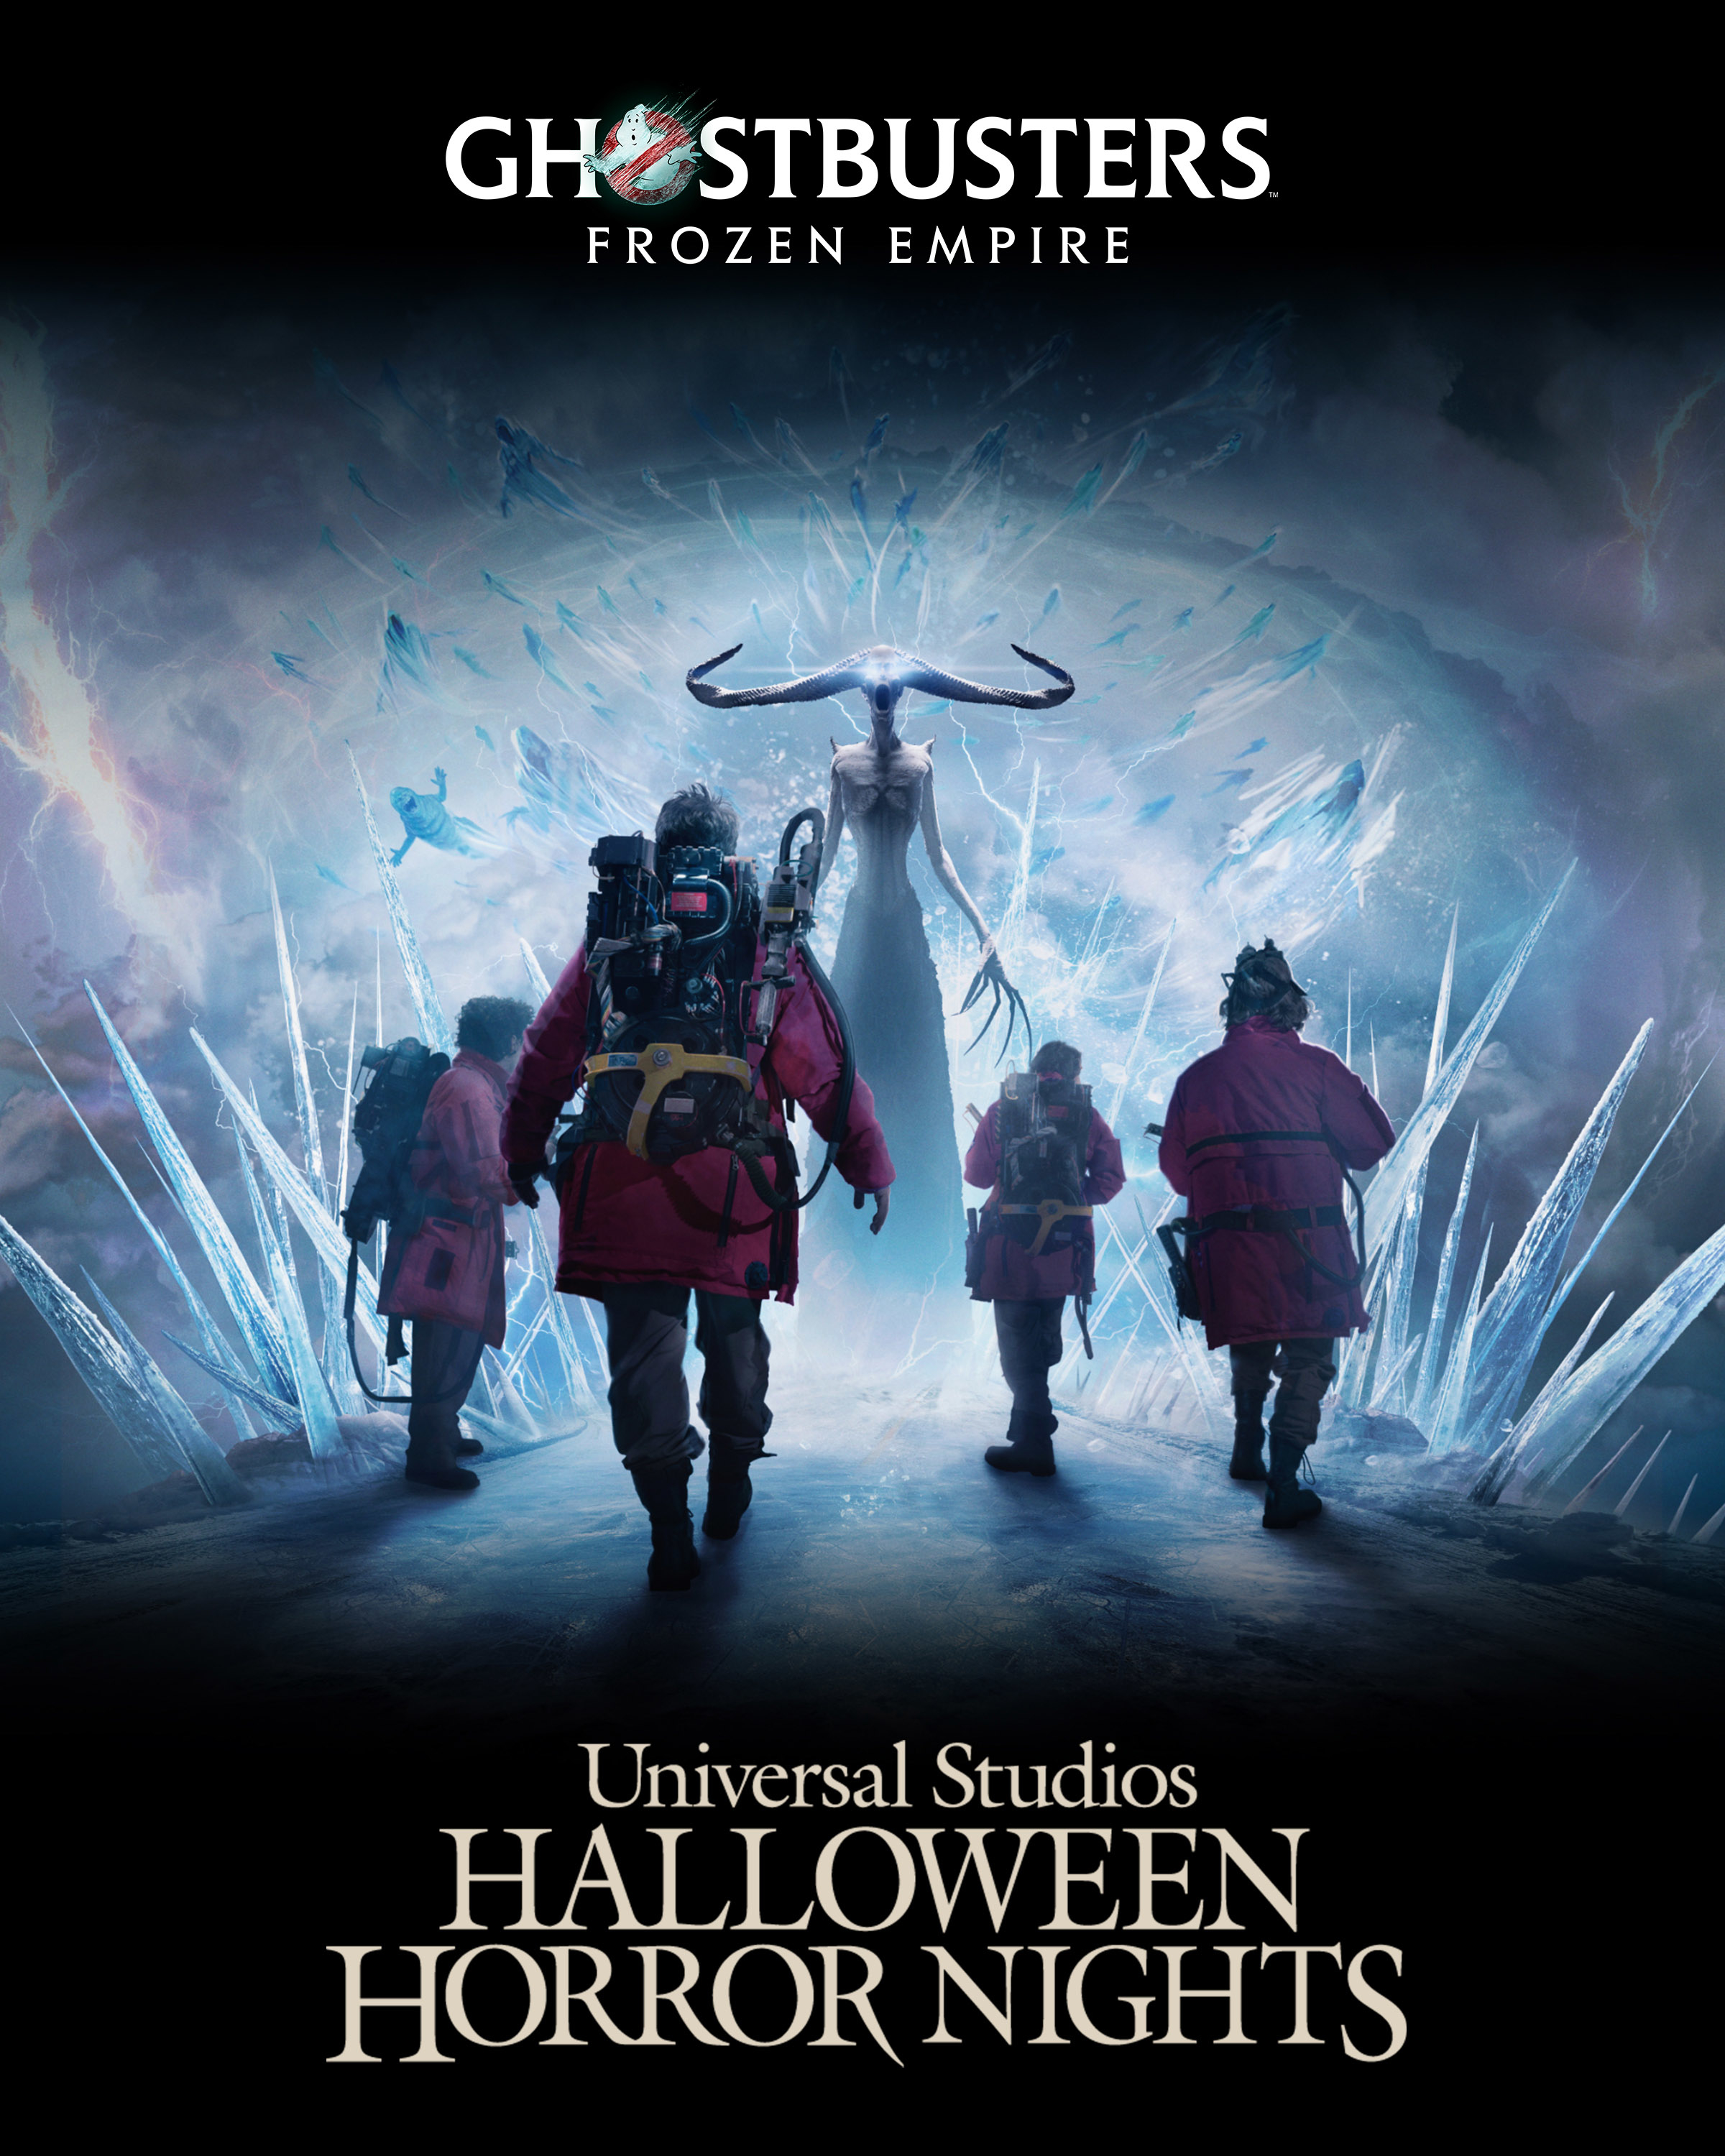 Promotional poster for &quot;Ghostbusters: Frozen Empire&quot; at Universal Studios Halloween Horror Nights, showing ghostbusters walking towards a ghostly figure amidst icy shards